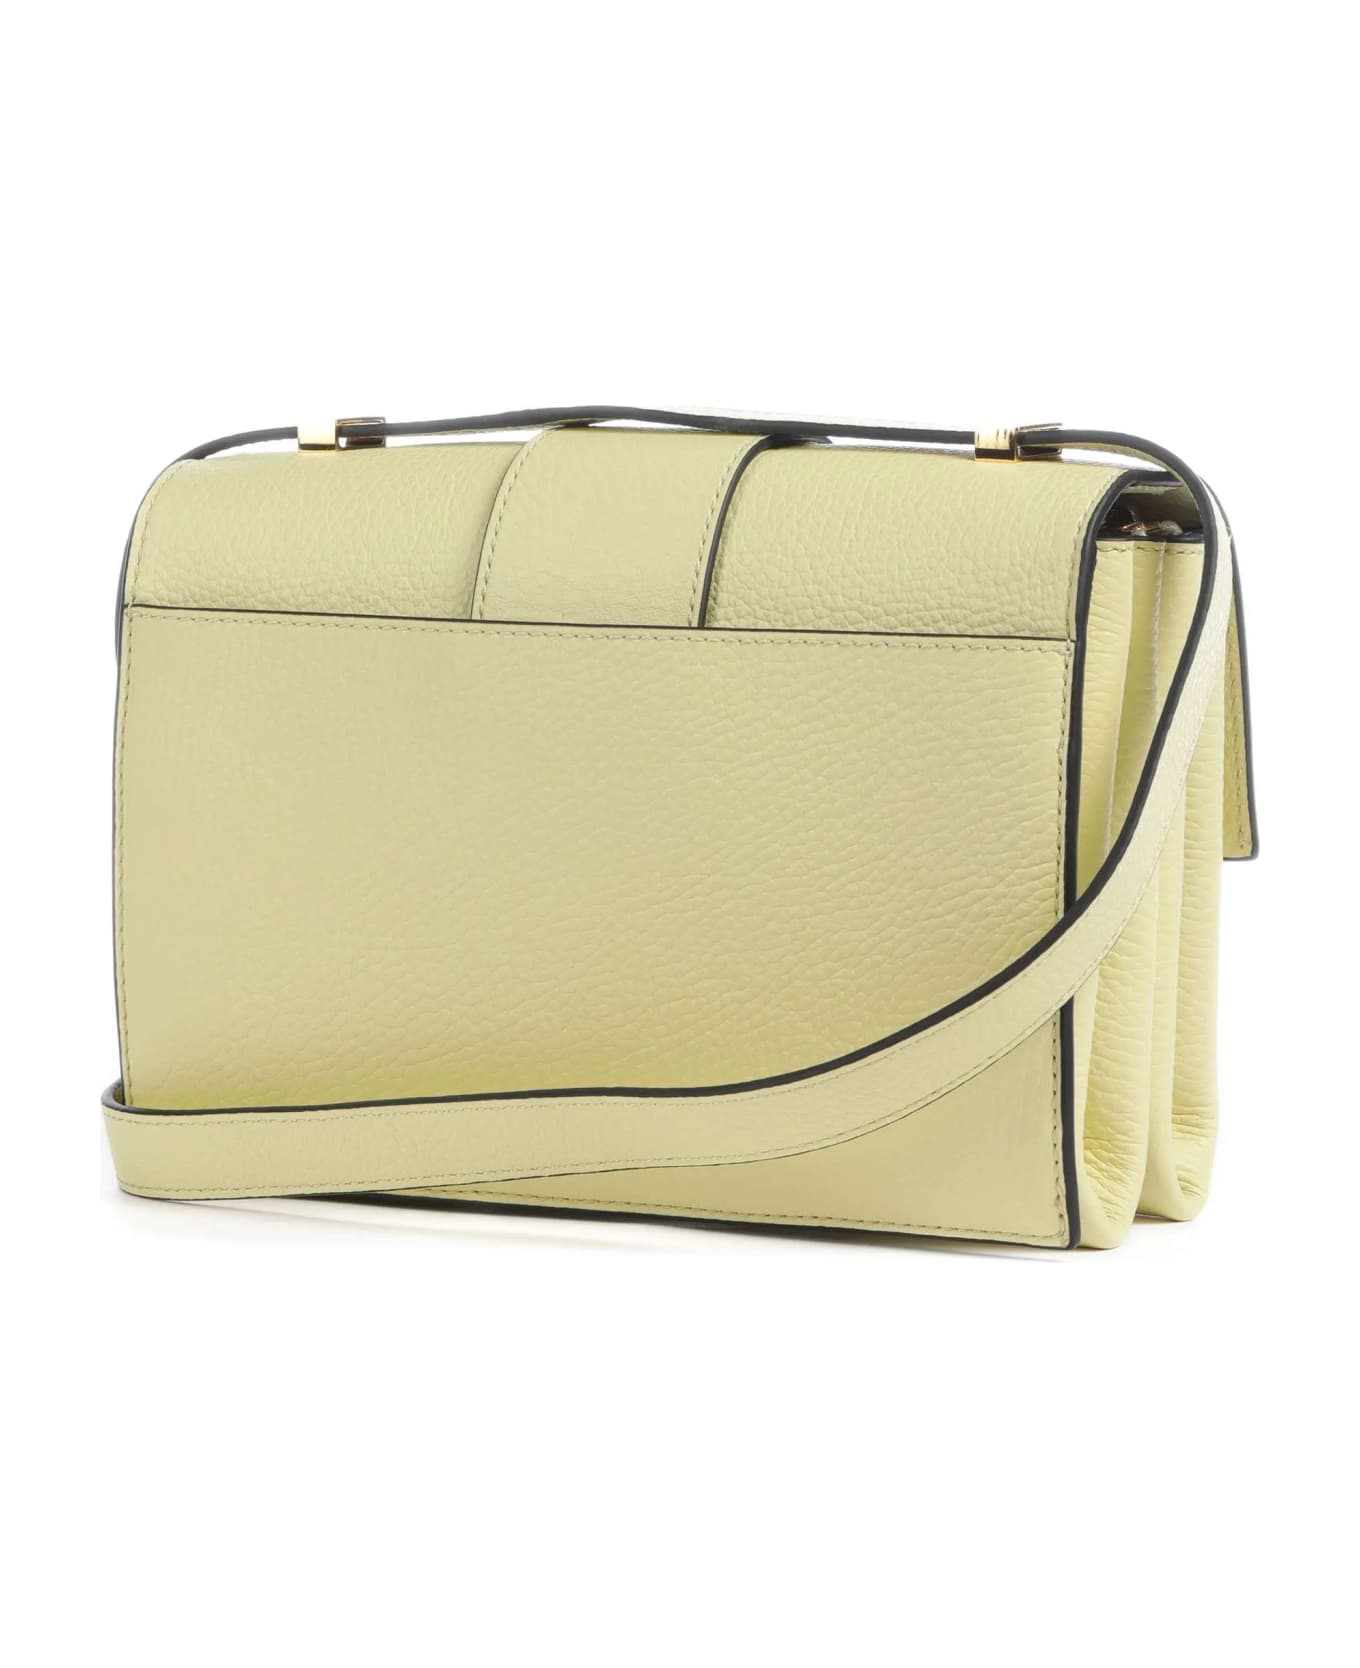 Coccinelle Arlettis Leather Bag - Lime wash